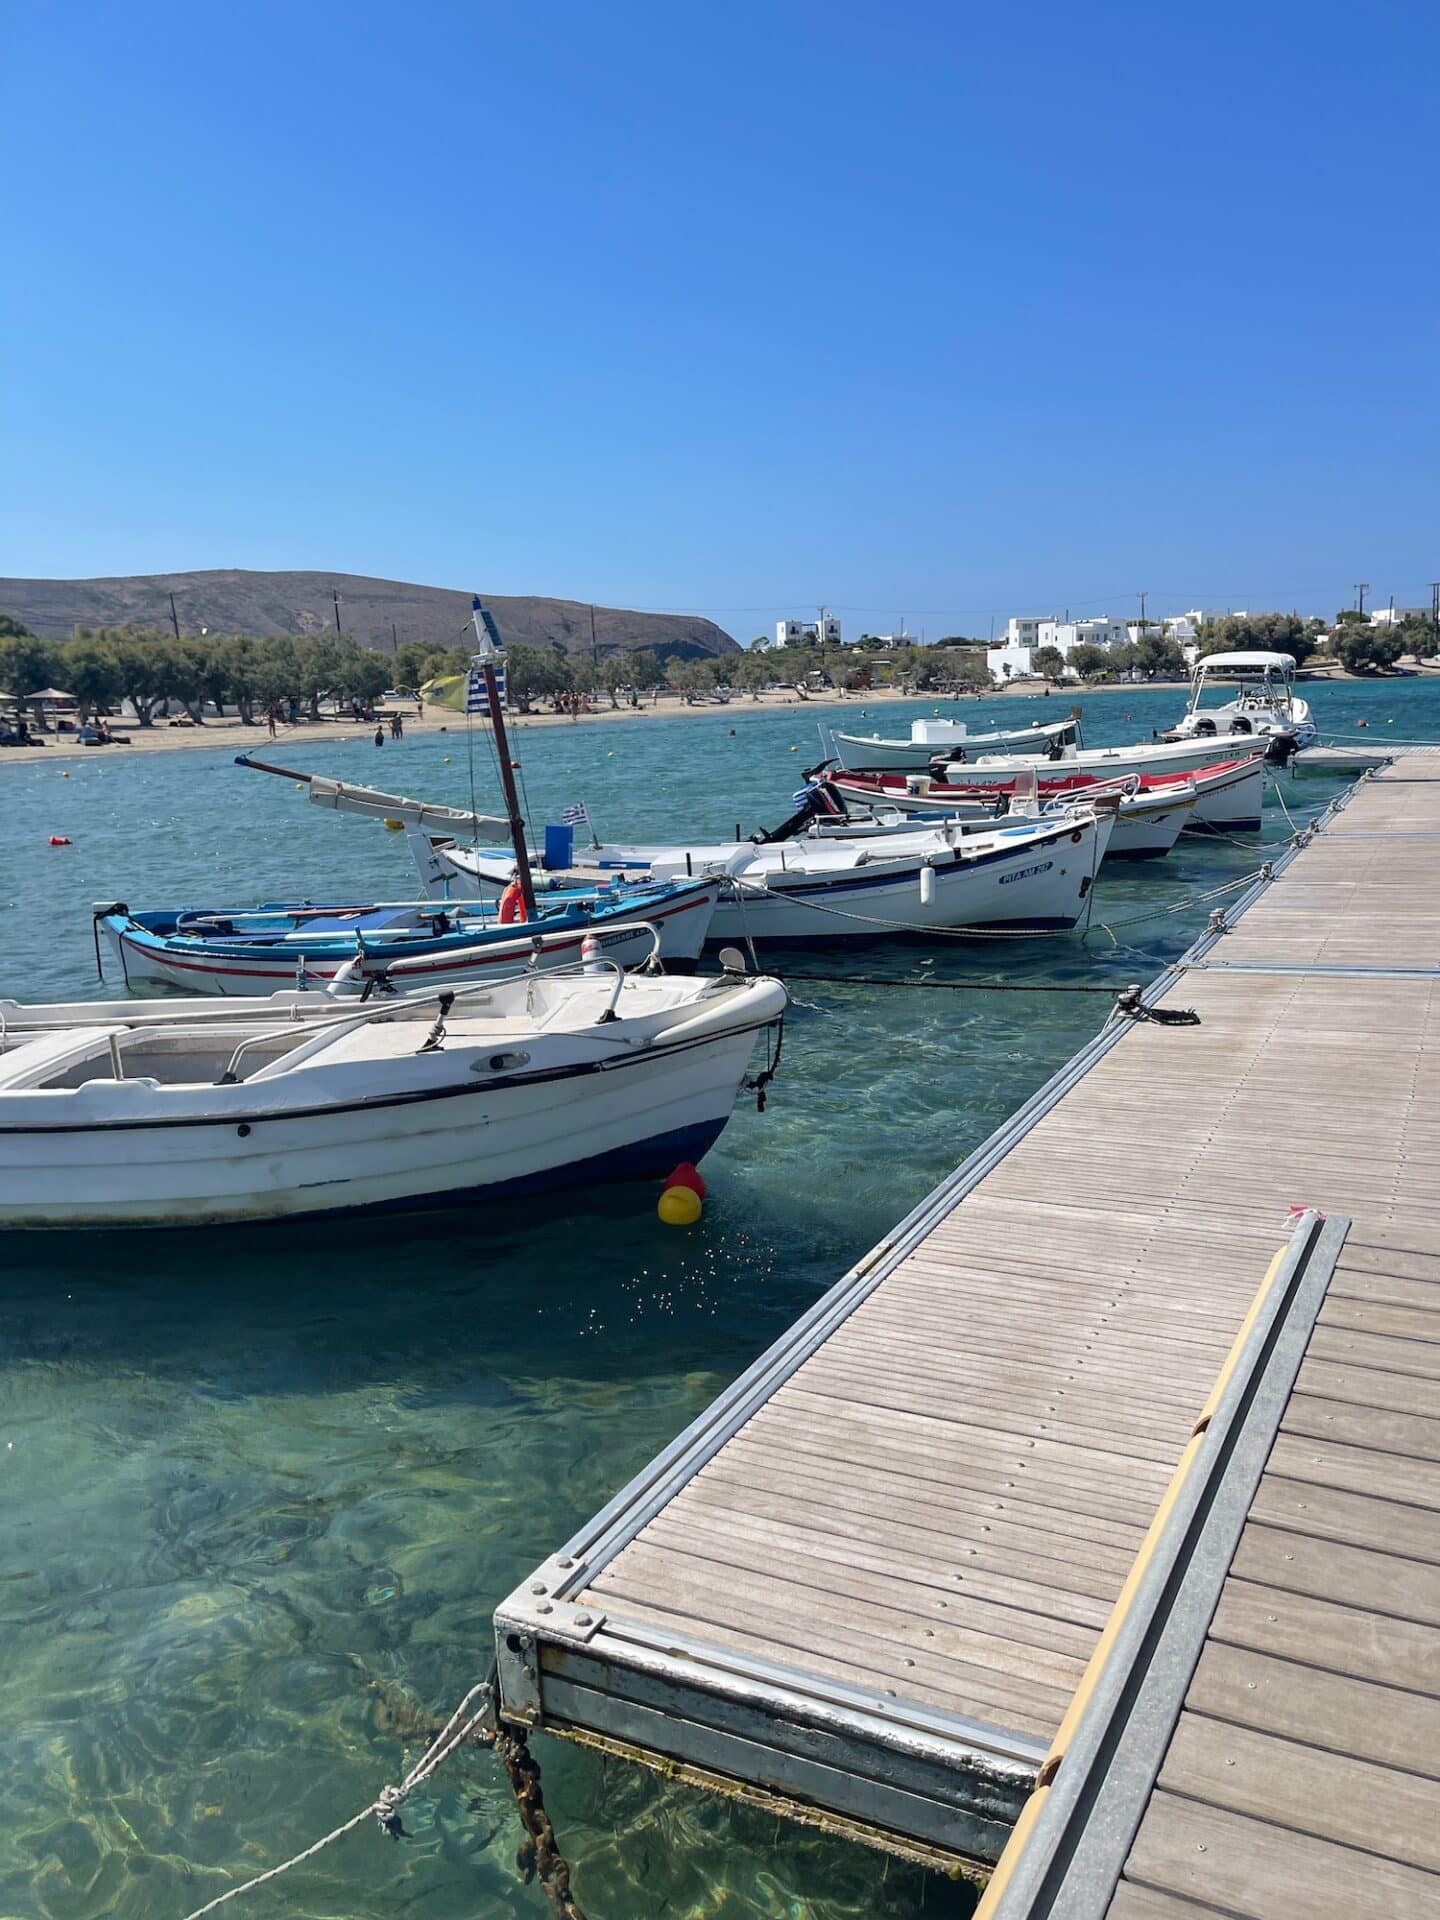 Several small boats moored at a wooden pier in Milos, with clear turquoise waters and white buildings in the background under a clear blue sky